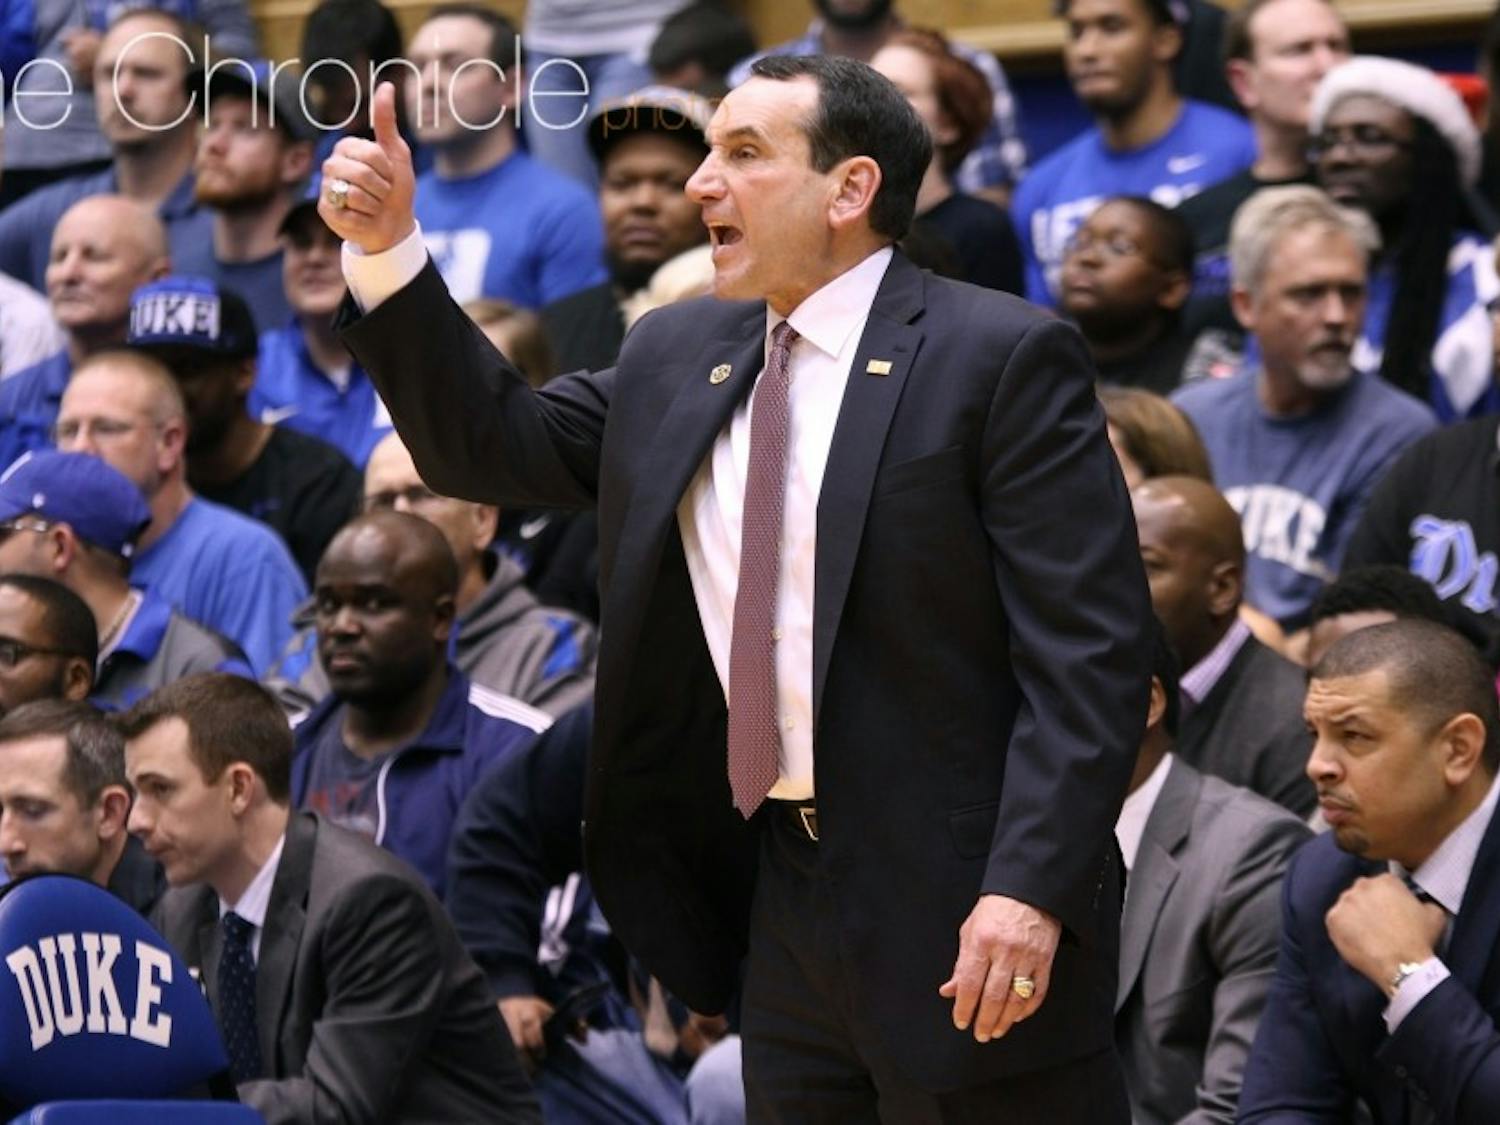 Head coach Mike Krzyzewski proved his Blue Devils were ready to compete with the best in a huge victory over the Tar Heels in 1988, made possible by a game-saving block by former Duke star Robert Brickey.